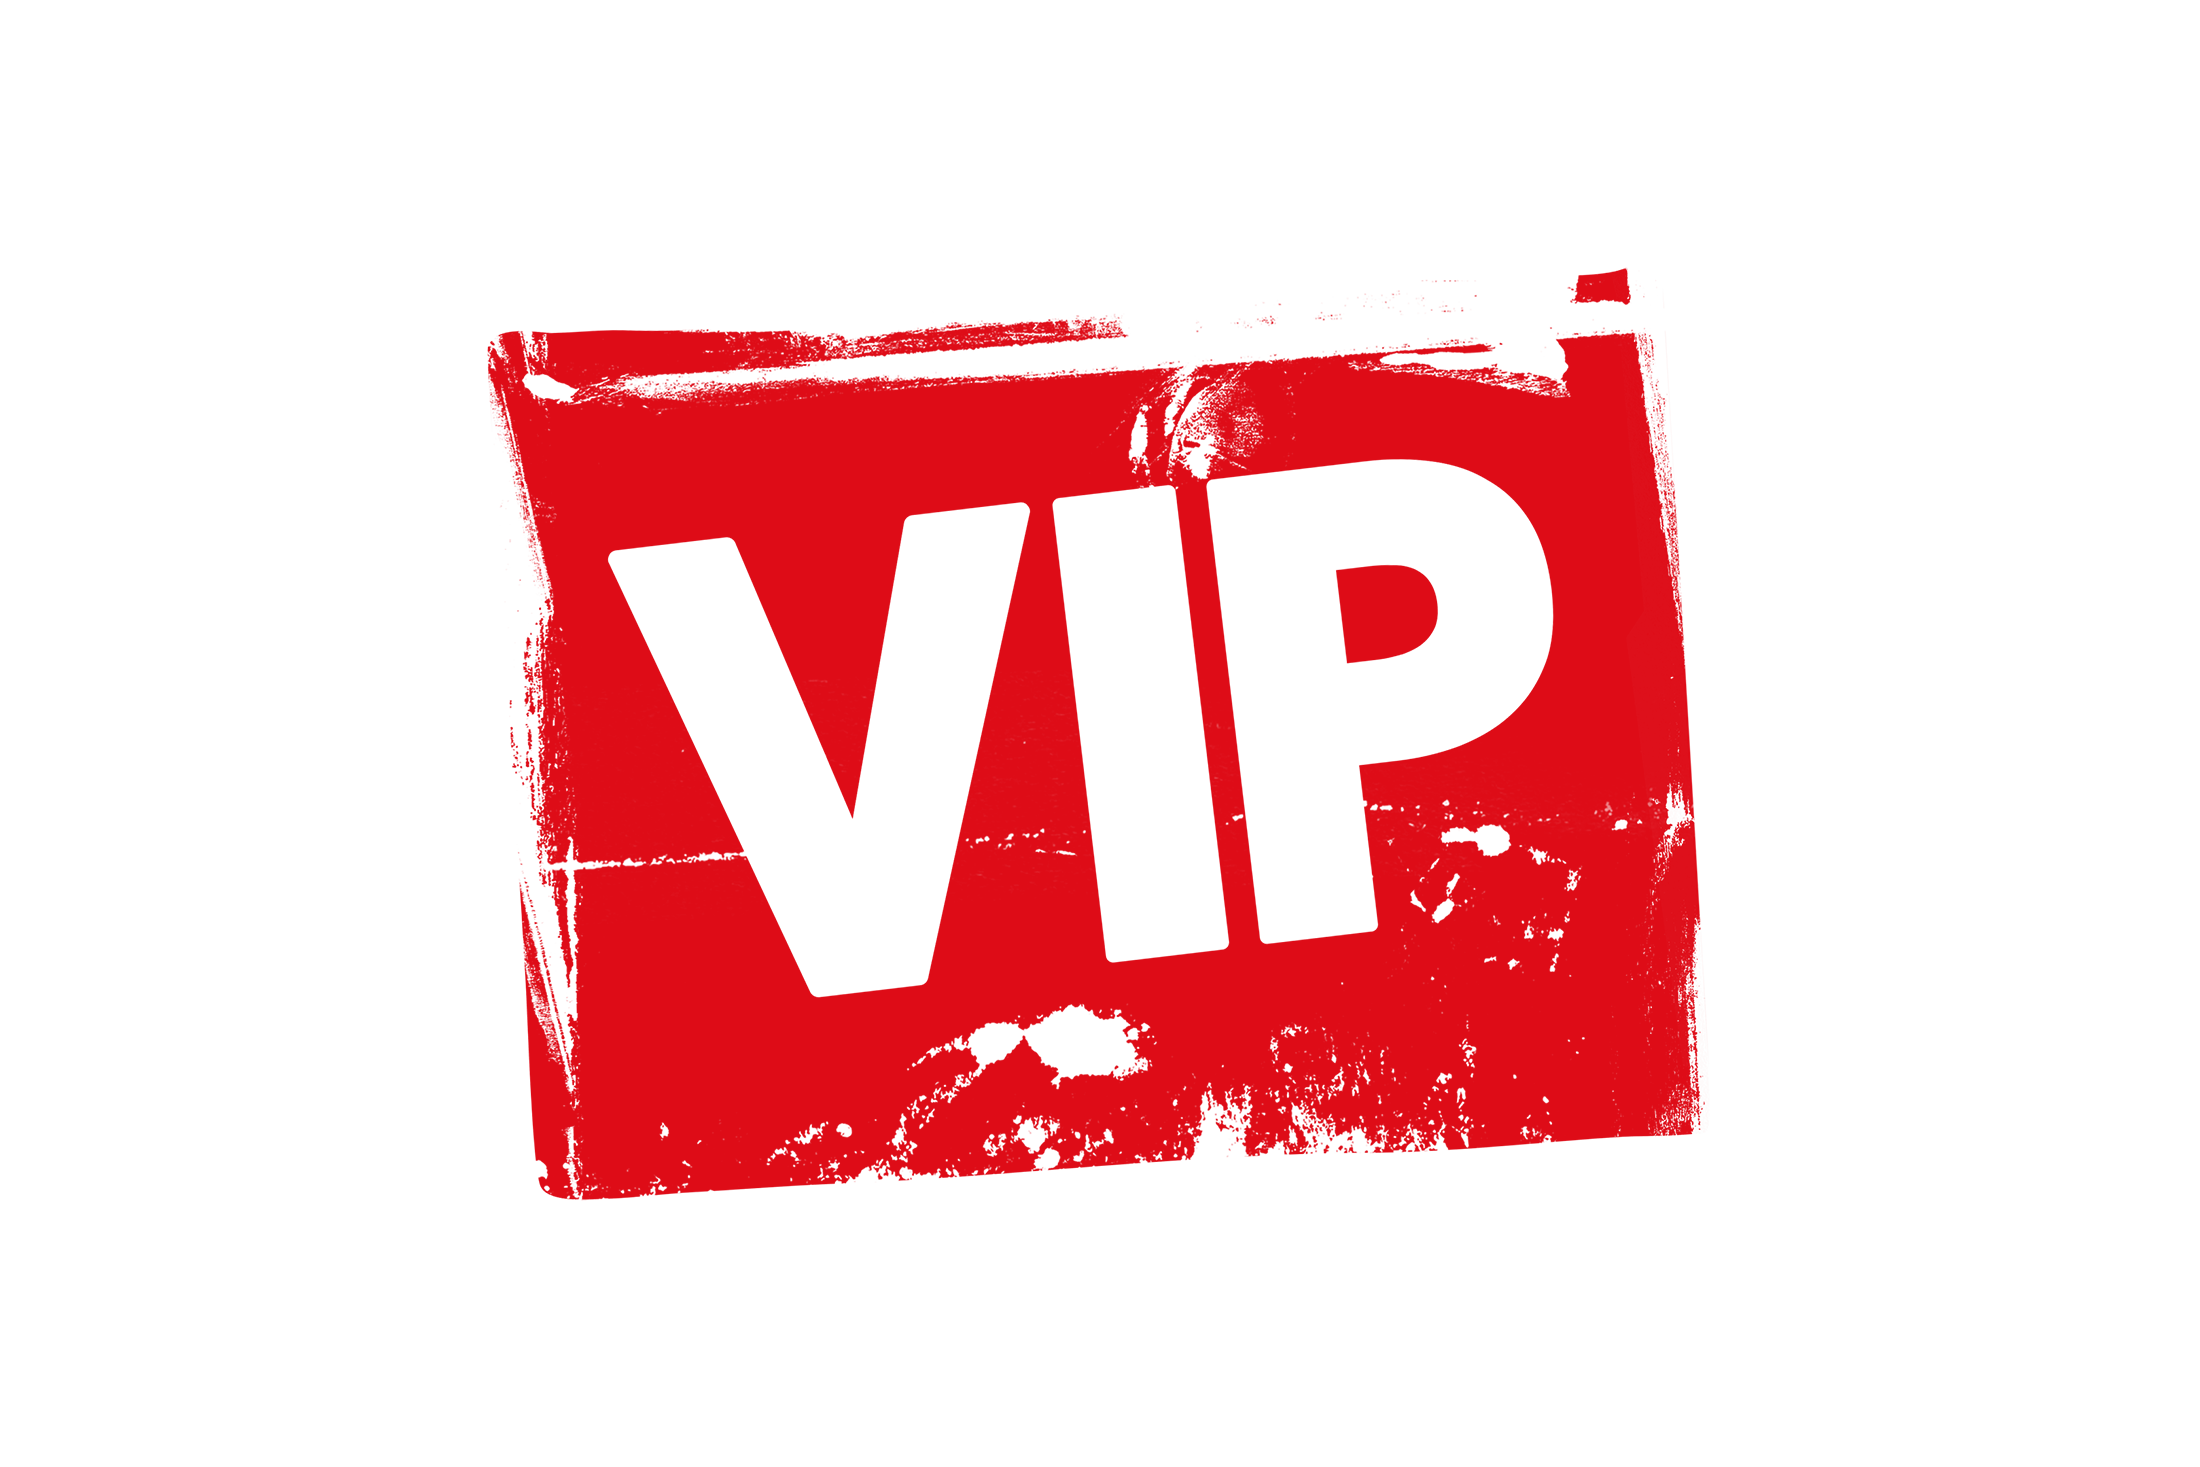 Grunge vip label PNG and PSD